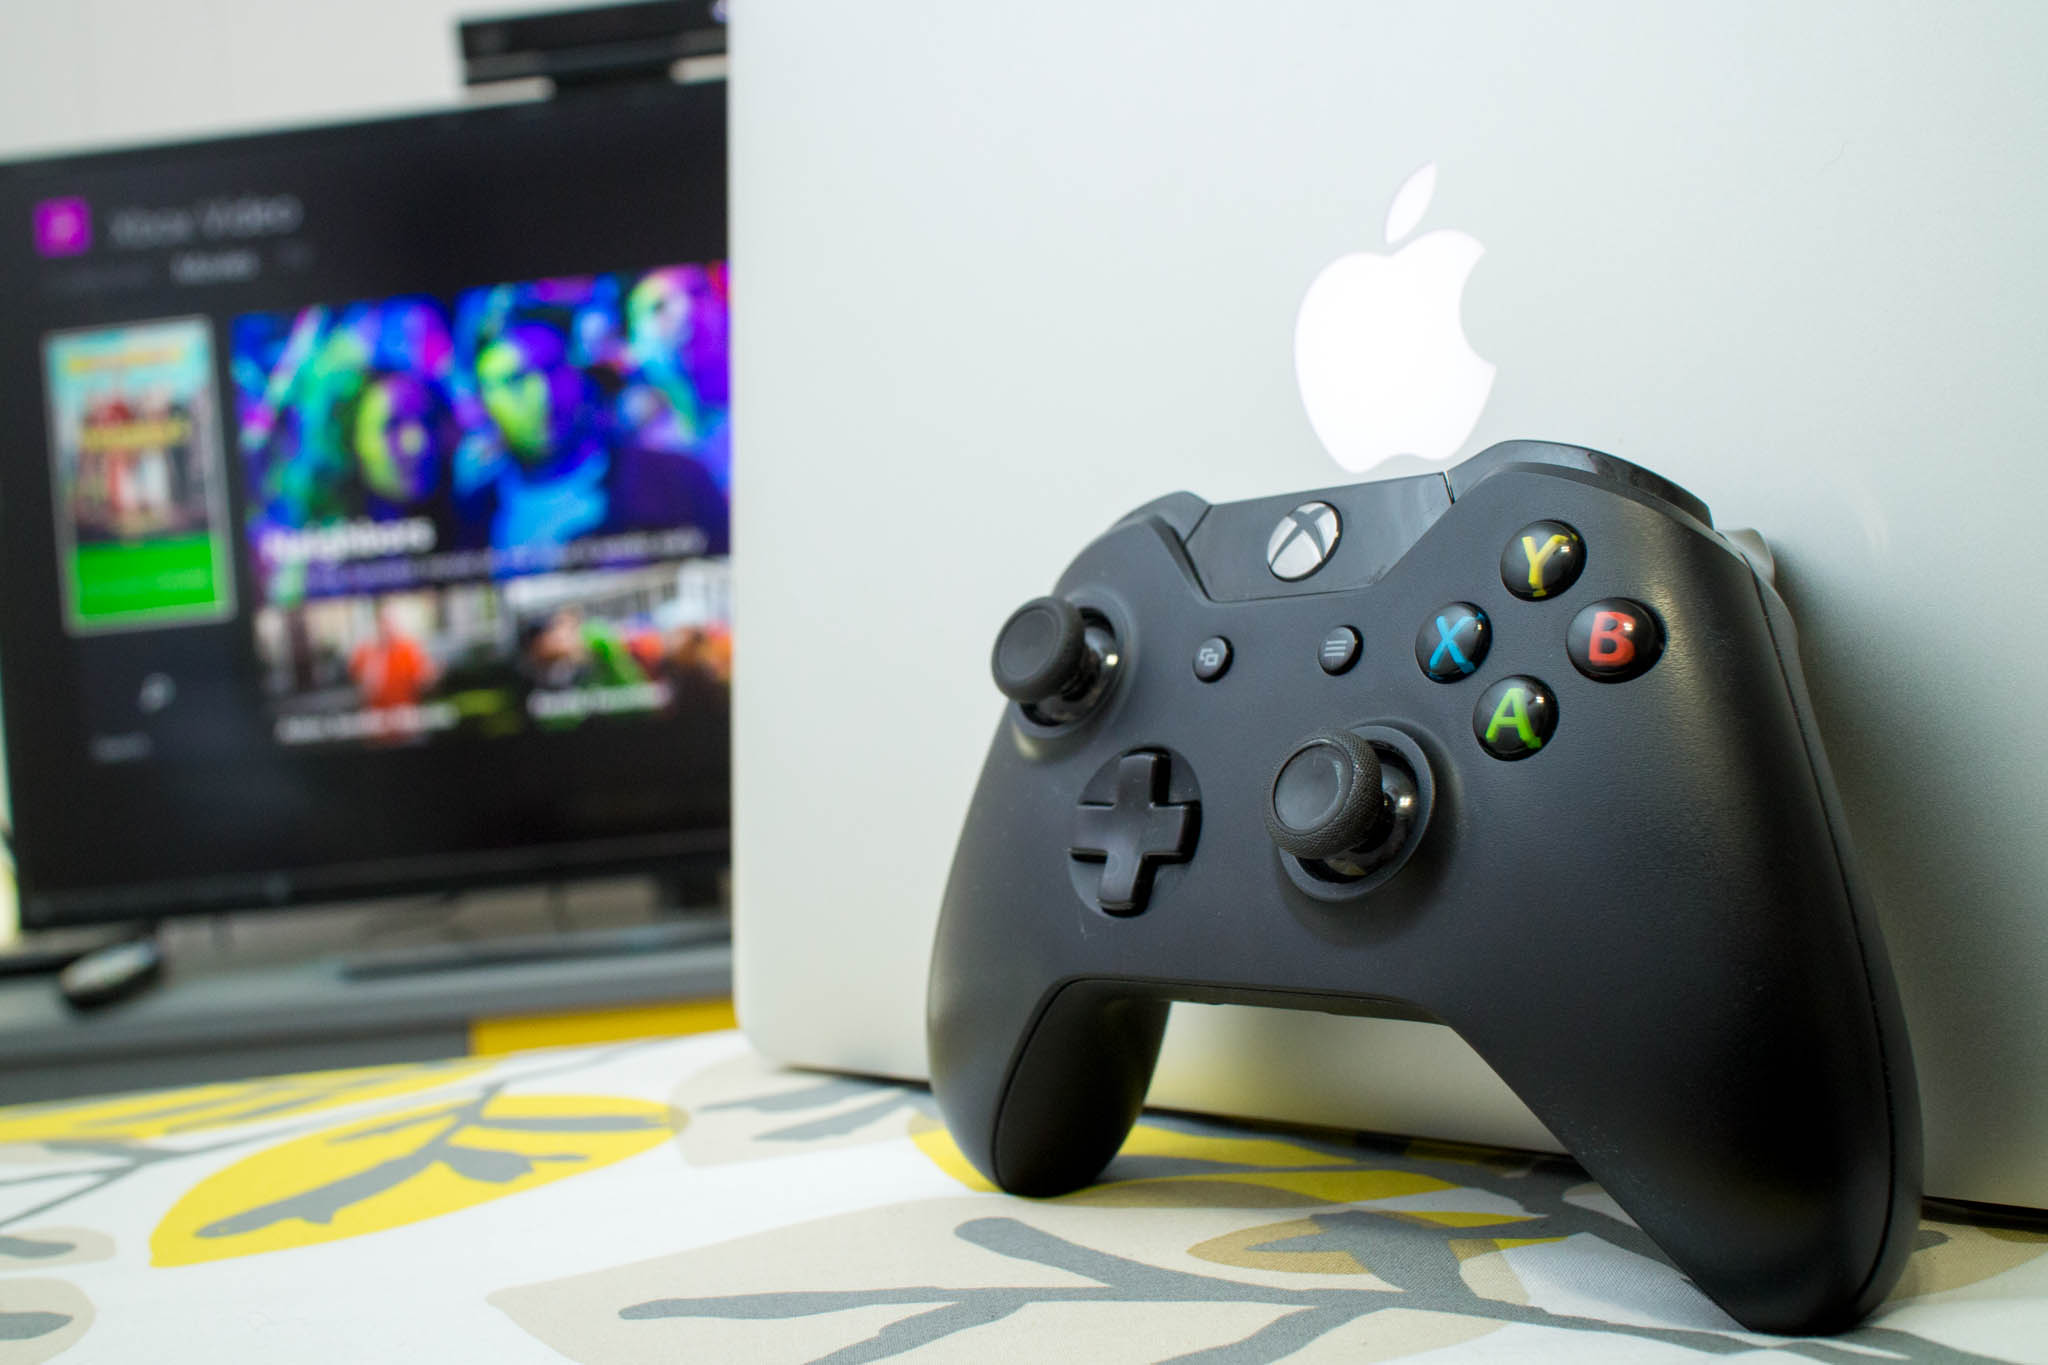 bladerdeeg Weg huis schilder How to easily stream videos from your Mac to Xbox One | iMore